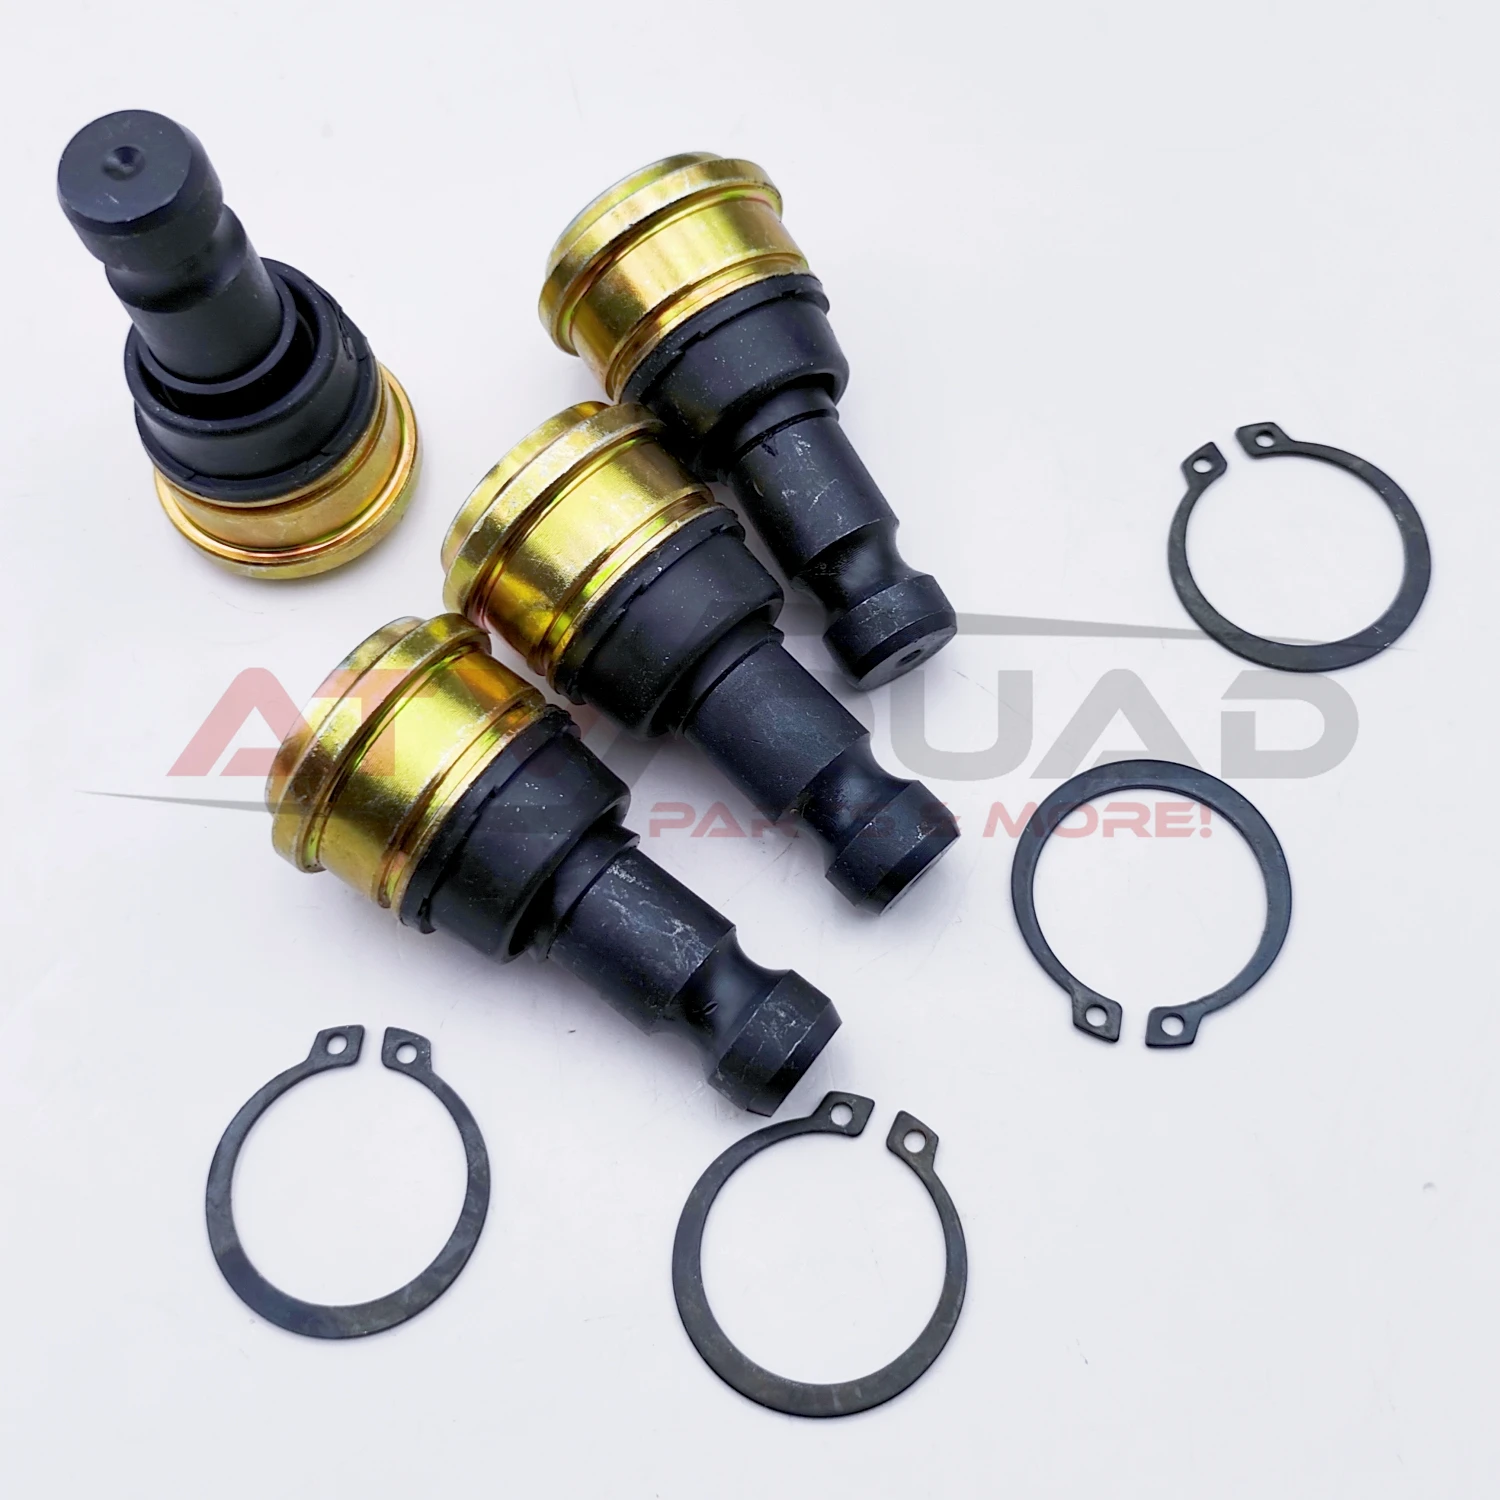 Upper Lower Ball Joint for Polaris Scrambler 850 XP 850 HO 1000 Sportsman 300 400 HO 500 HO 550 800 850 1000 SP Touring X2 XP for bentley arnage high quality hot selling front upper control arm ball joint